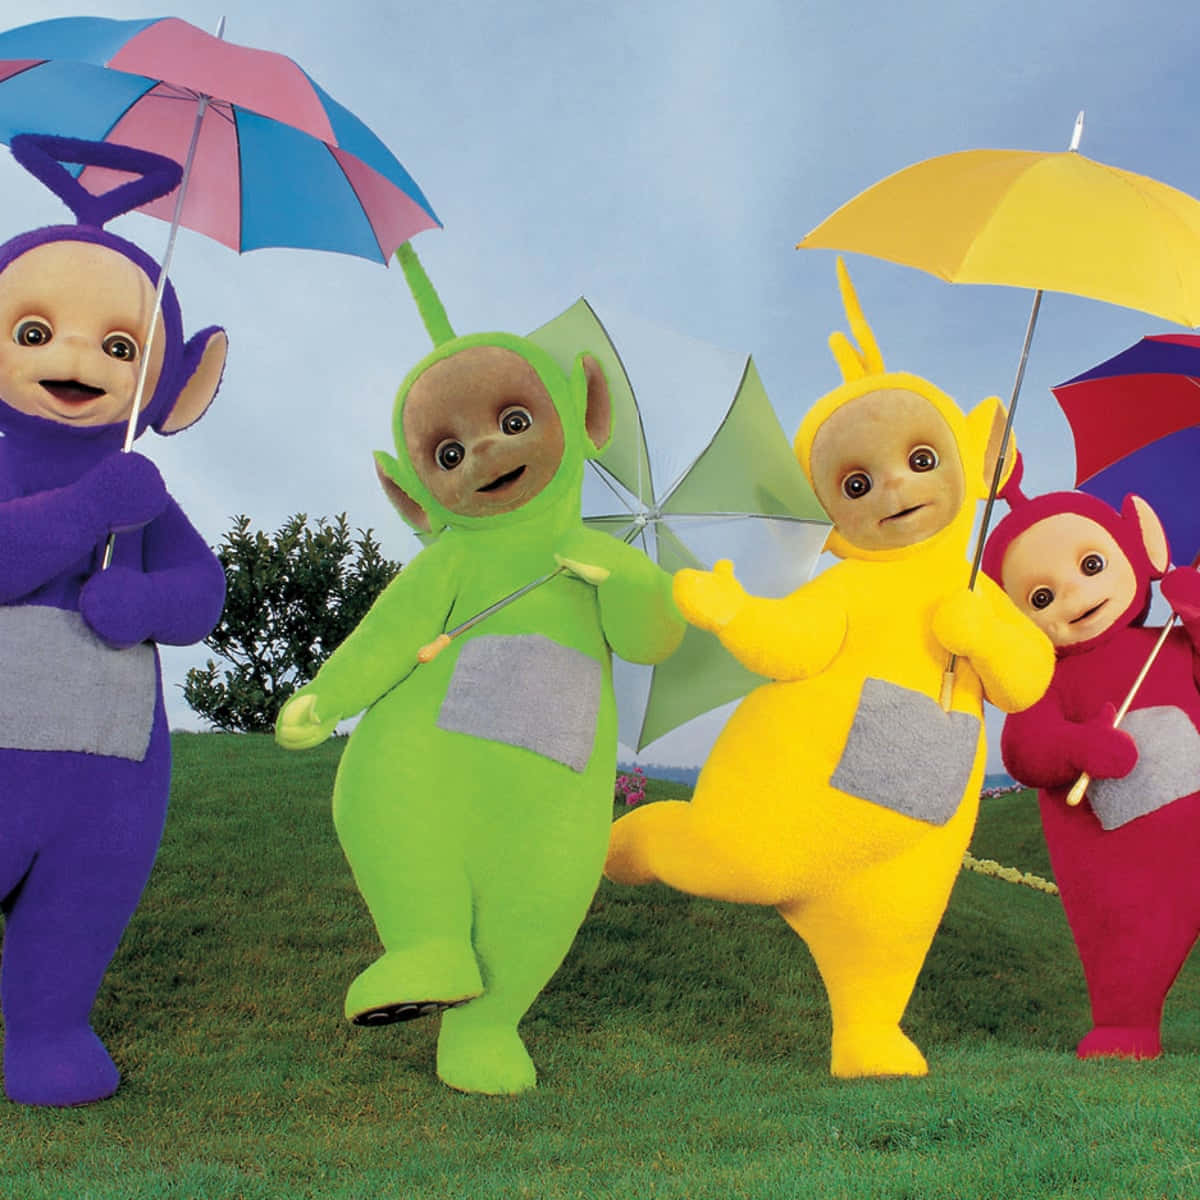 Have a Tubbytastic Day with the Teletubbies